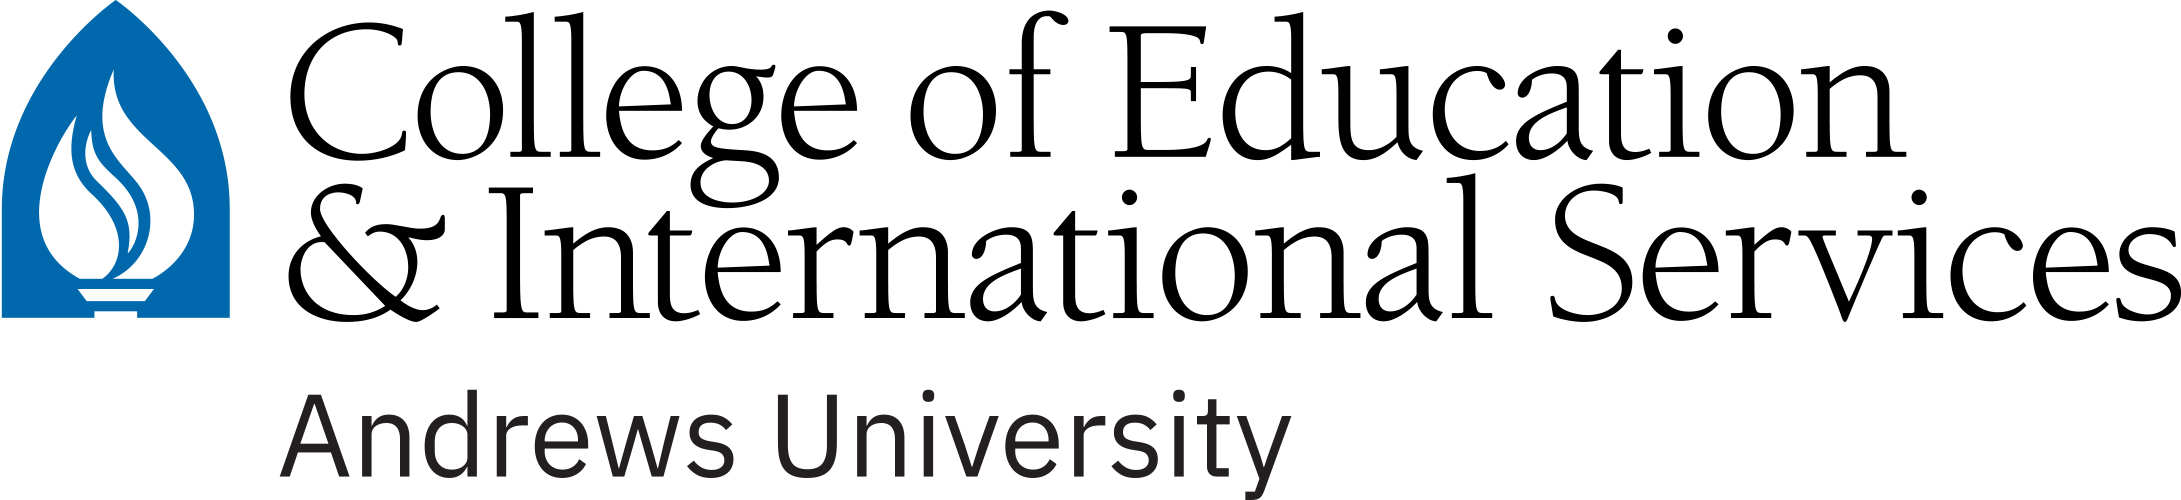 College of Education & International Services